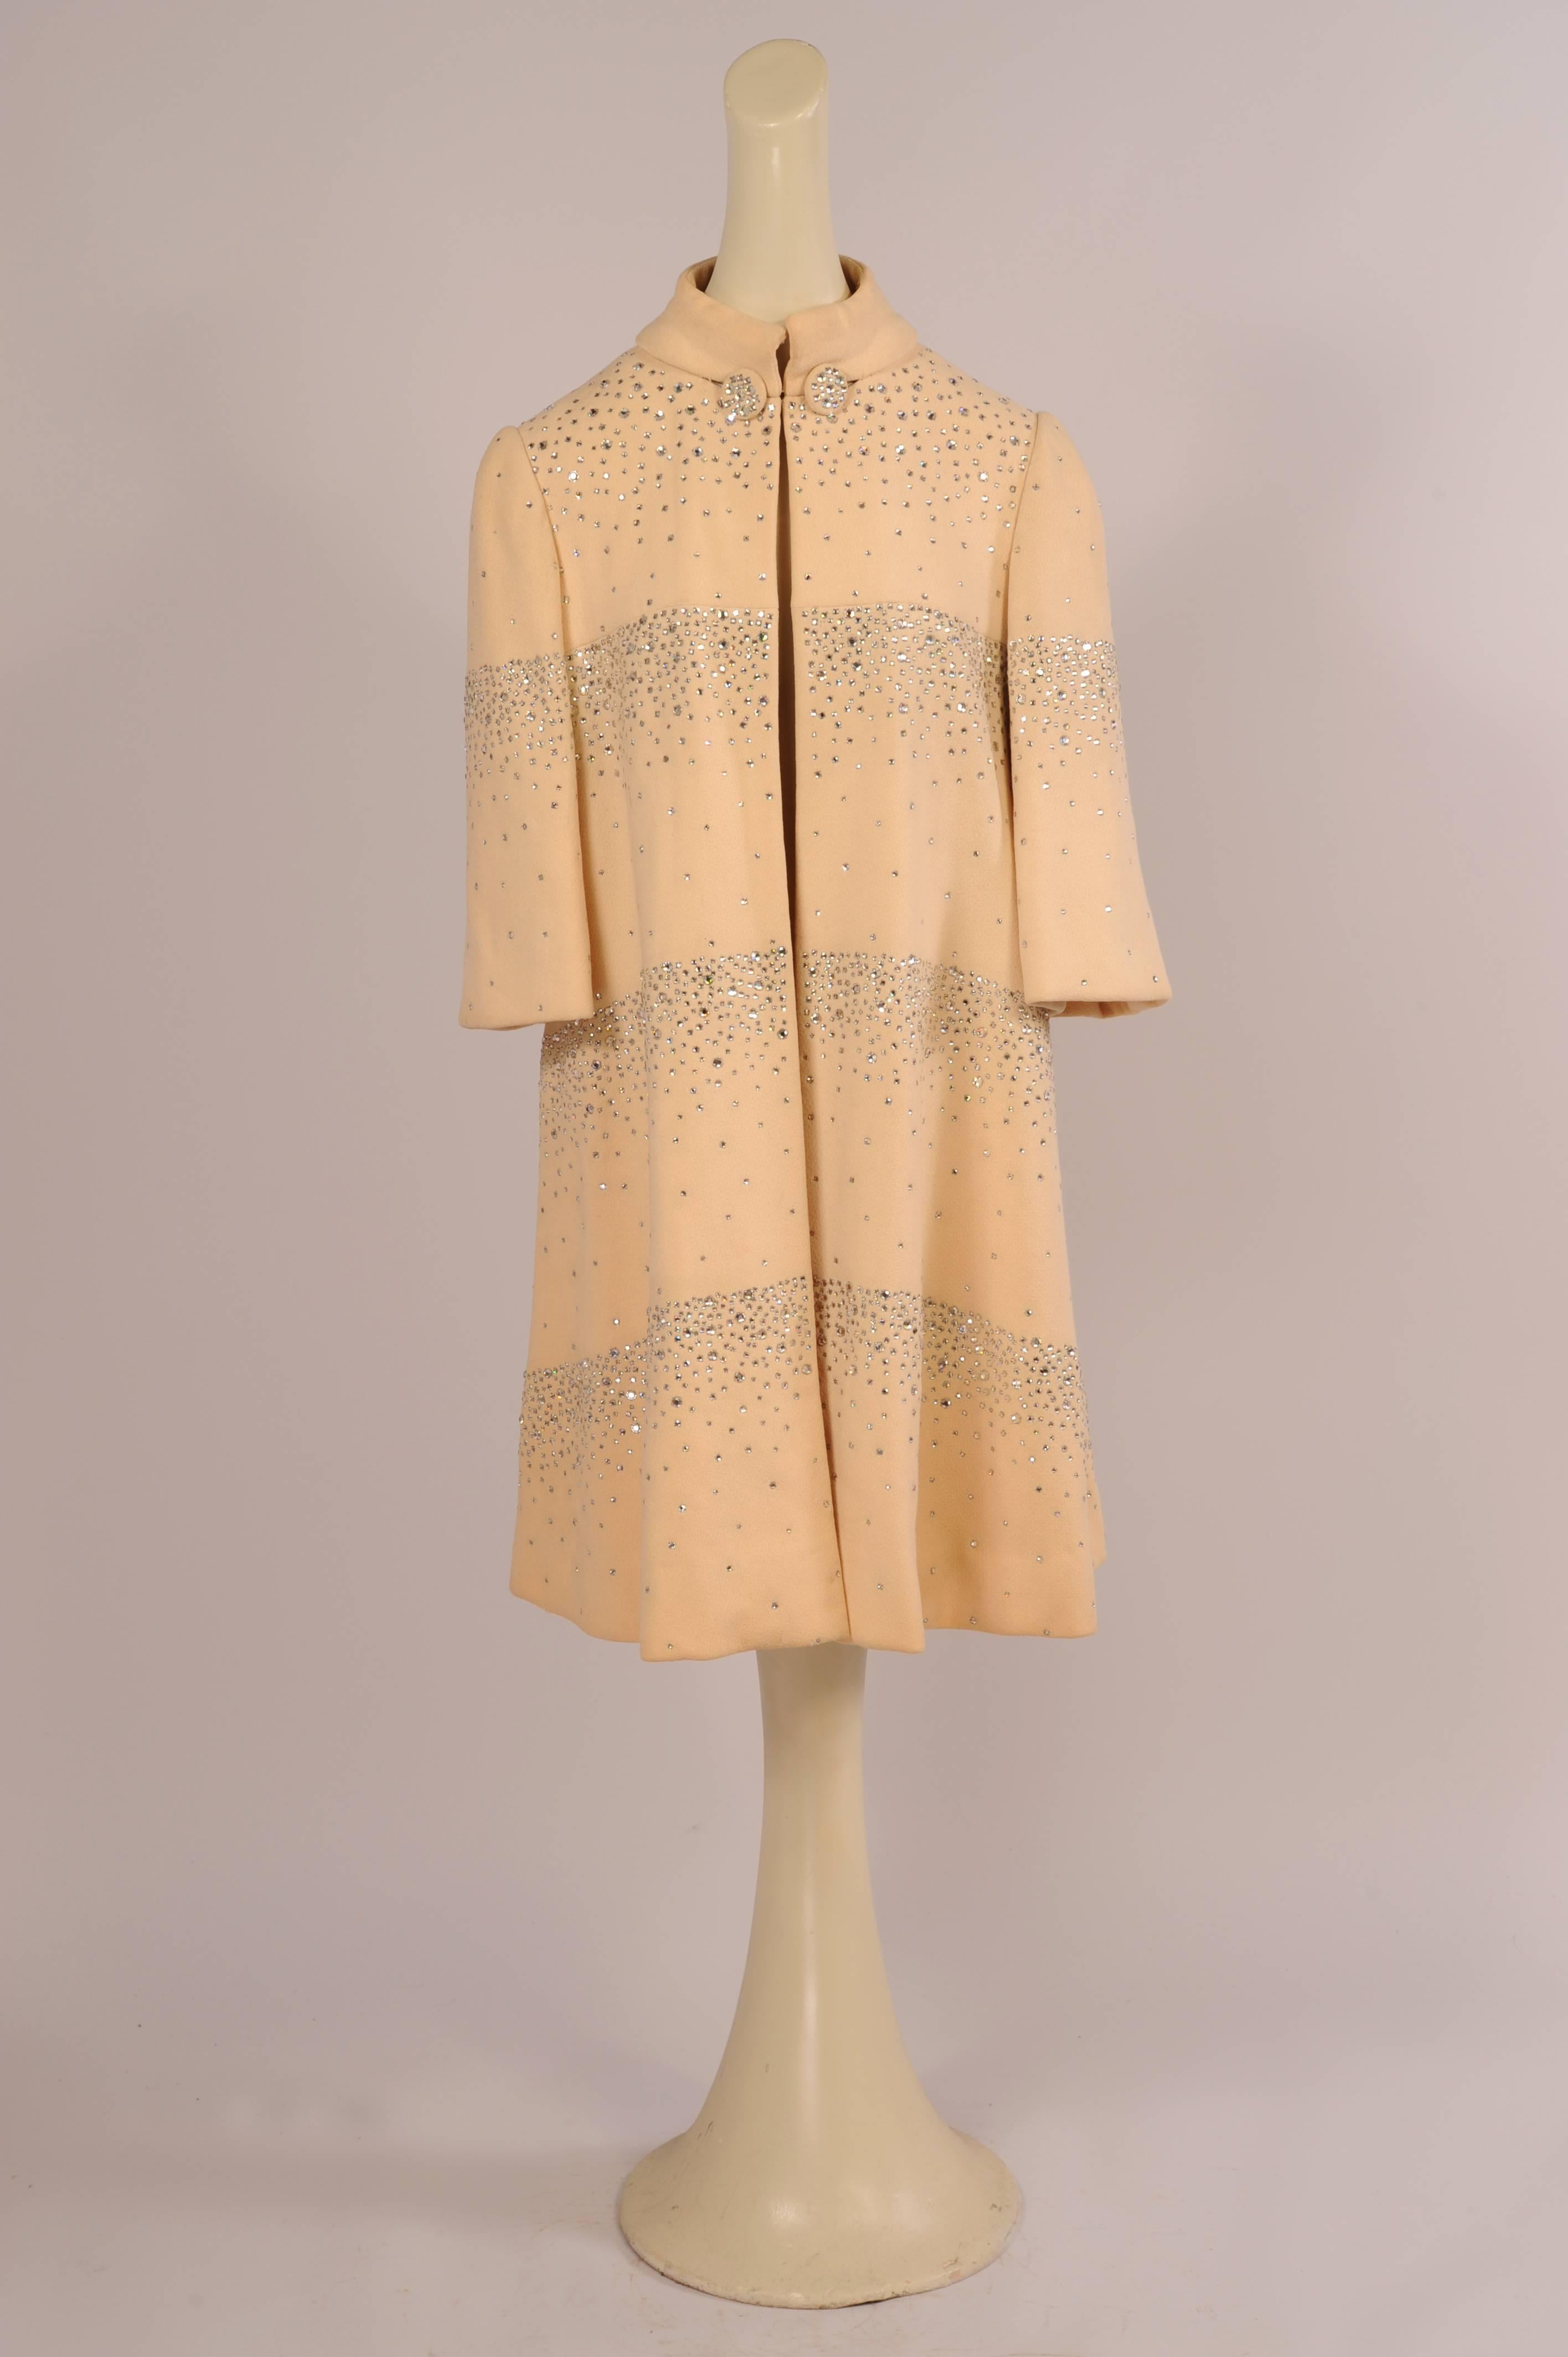 Sparkling and eye catching, this is a rare cream colored wool crepe example of this stunning coat designed by Pauline Trigere. It is covered with prong set rhinestones in various sizes. They begin as horizontal bands on the front of the coat and